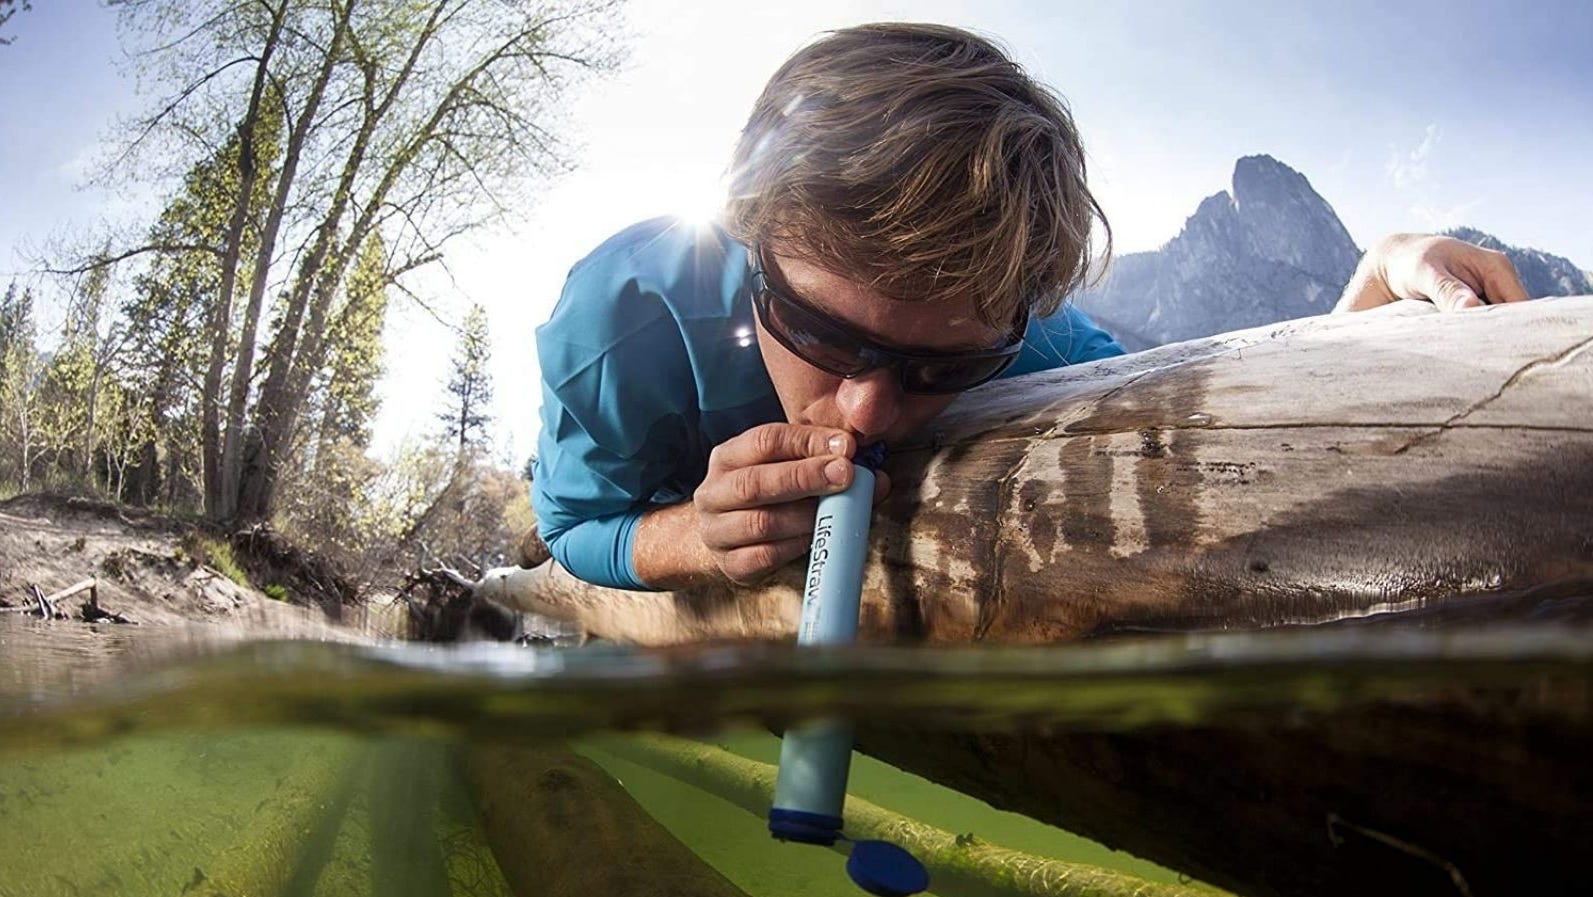 Best gifts for men on Amazon: LifeStraw